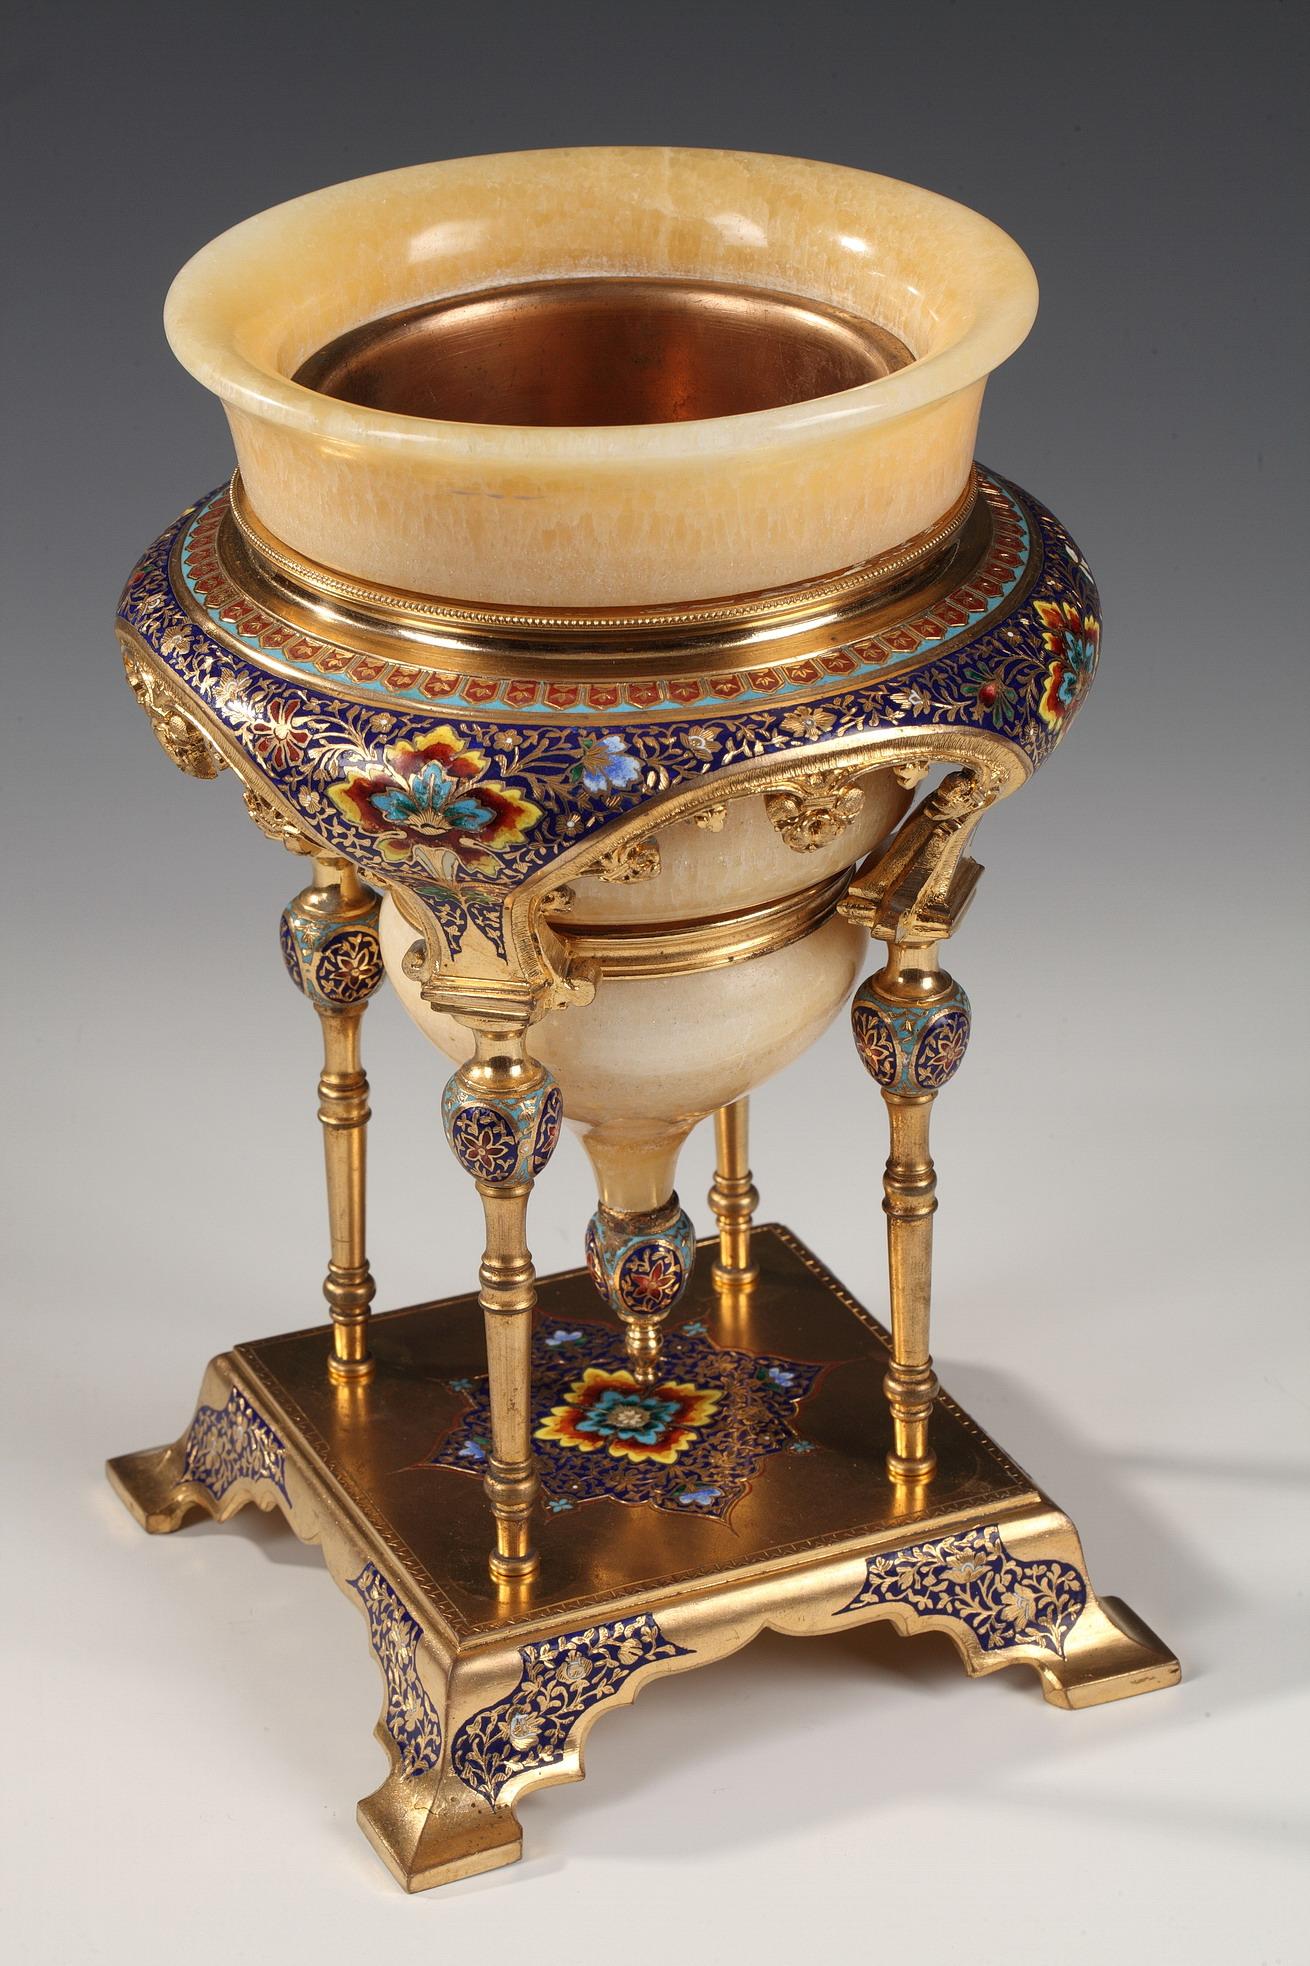 An oriental onyx bowl, attributed to Louchet Frères, inserted in an architectural gilt bronze mounting on four columns supporting a large moulding enriched with polychrome cloisonné enamel foliated patterns. The whole raises on an enameled gilt